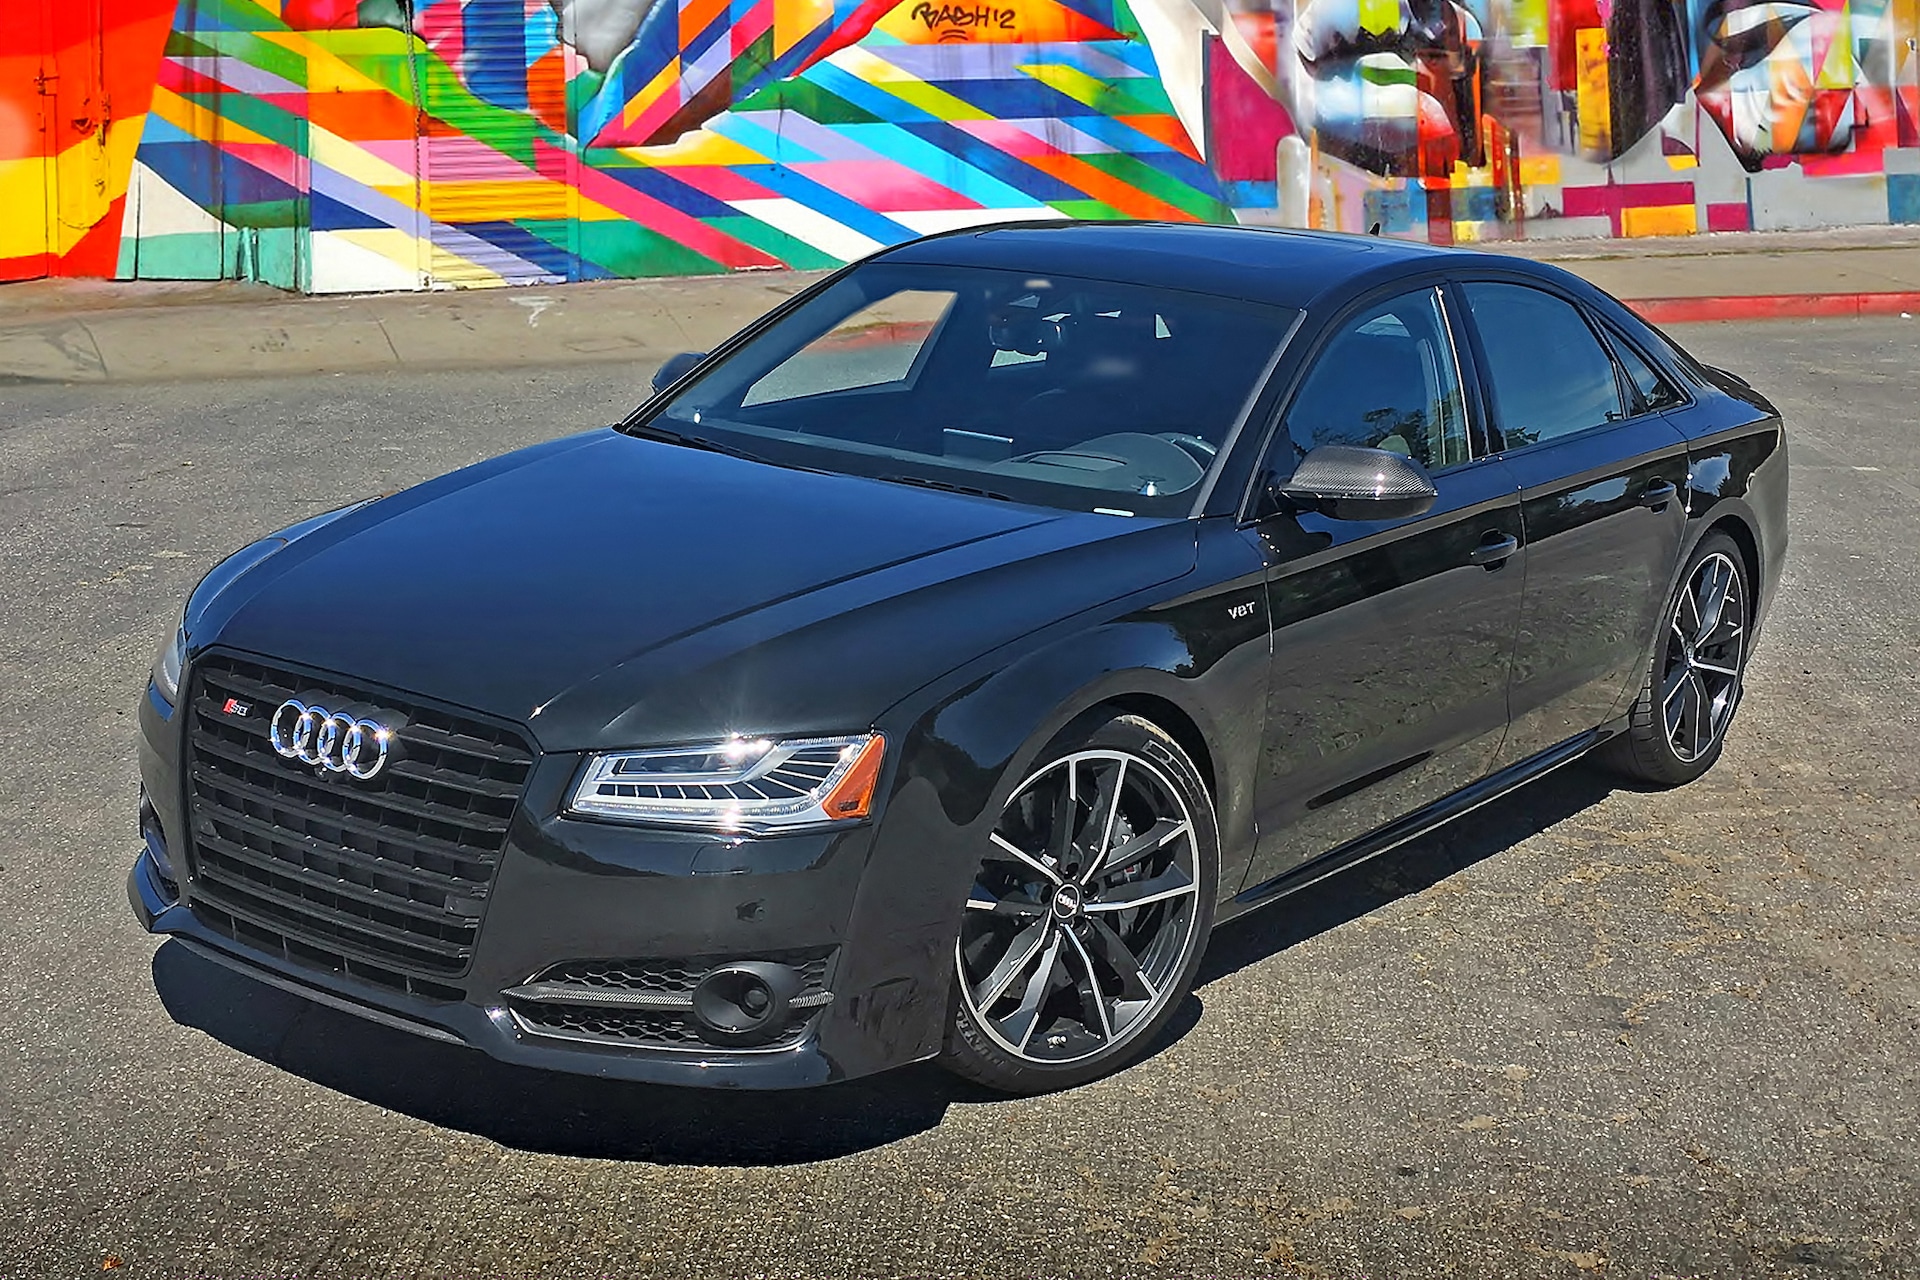 One Week With: 2017 Audi S8 Plus